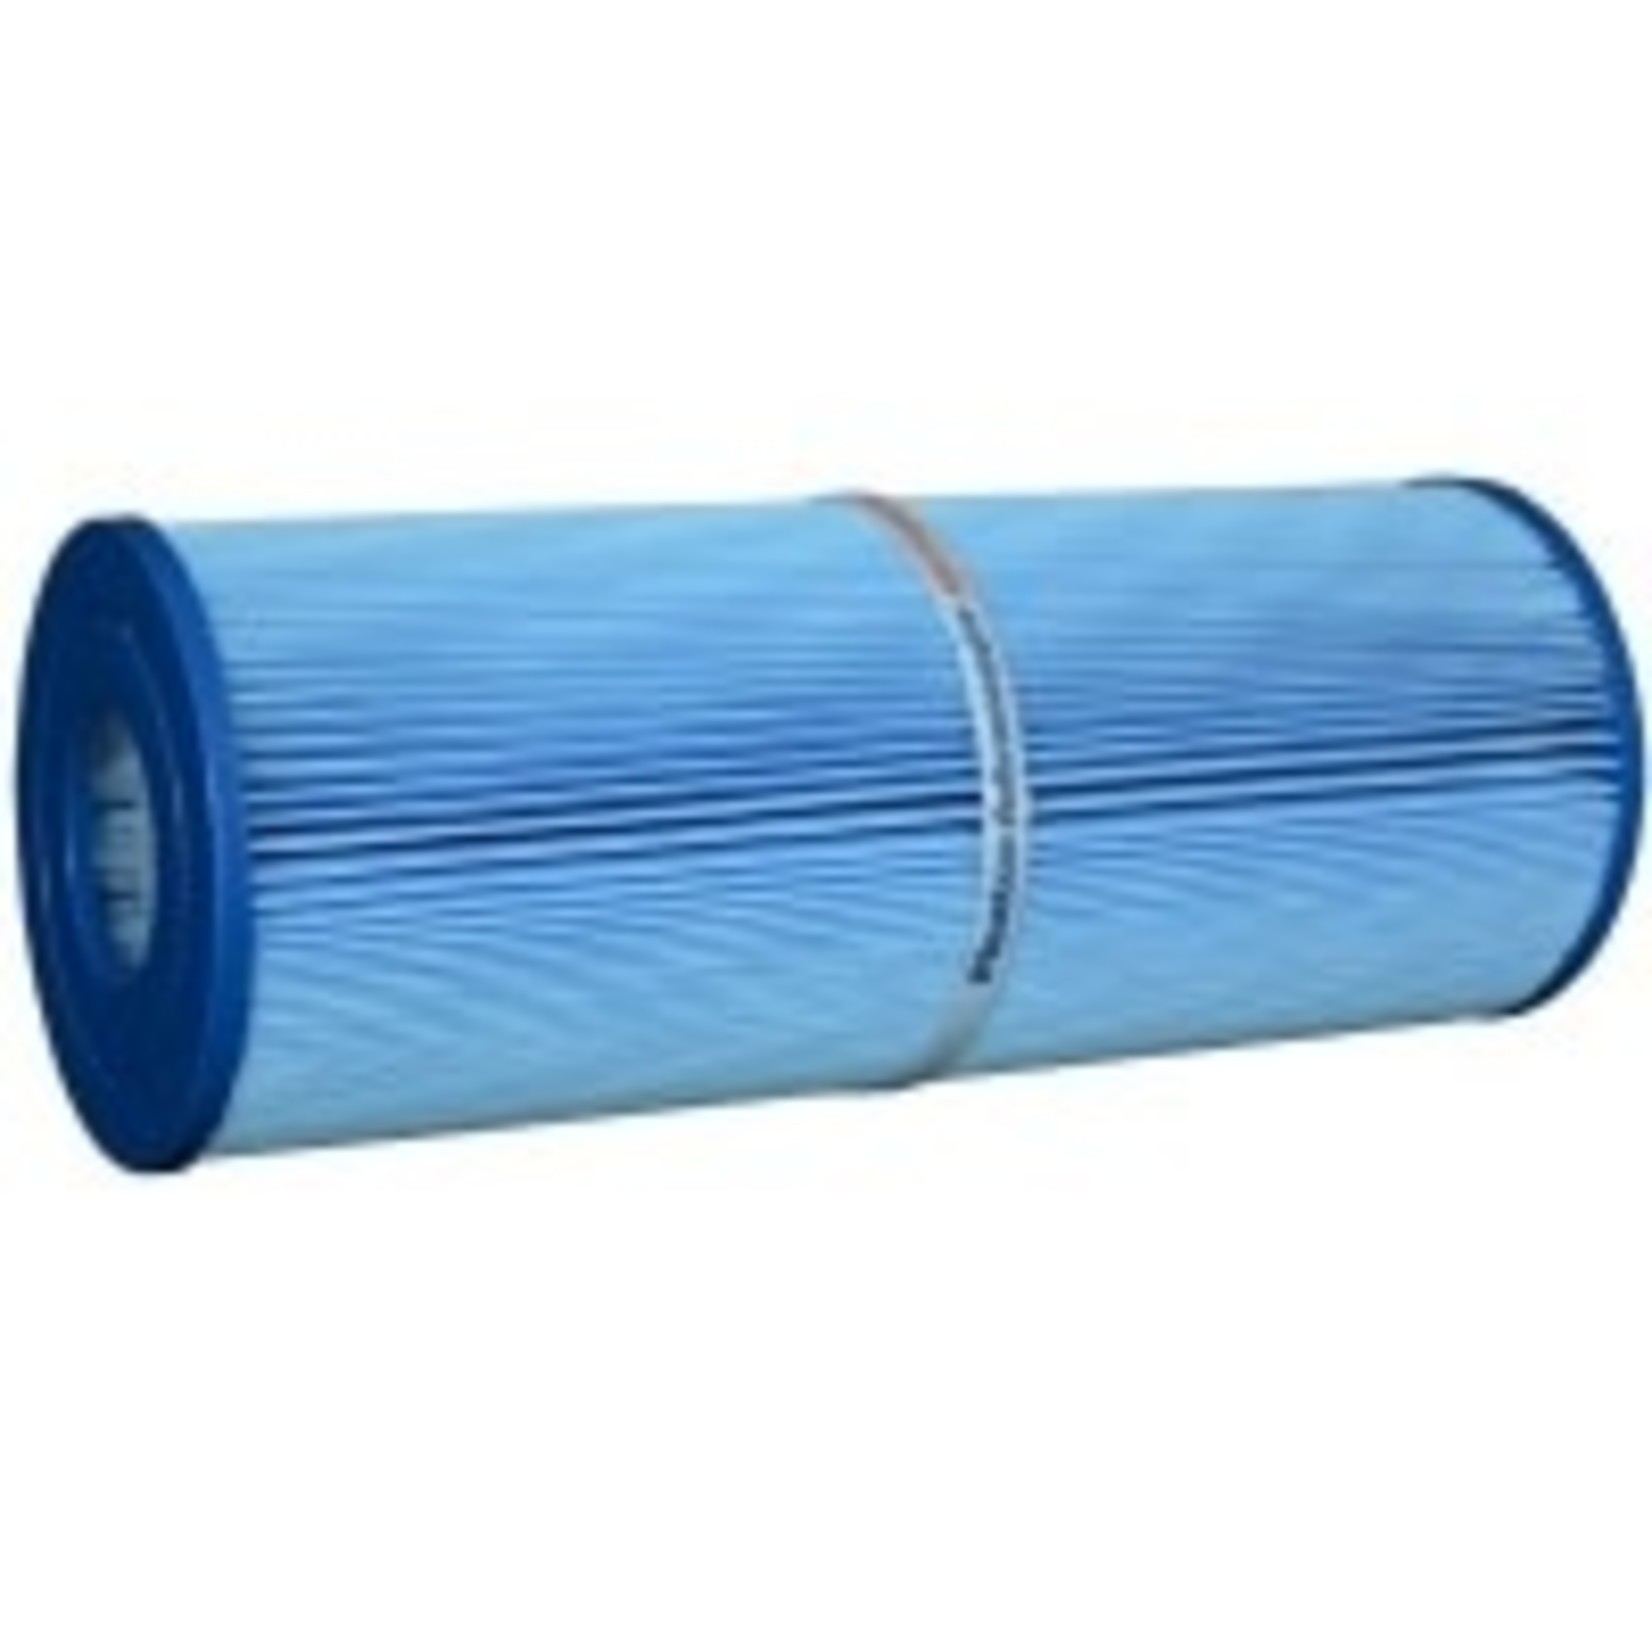 Unicel Filter C-4326AM (25sq.ft WaterWay - Antimicrobial)